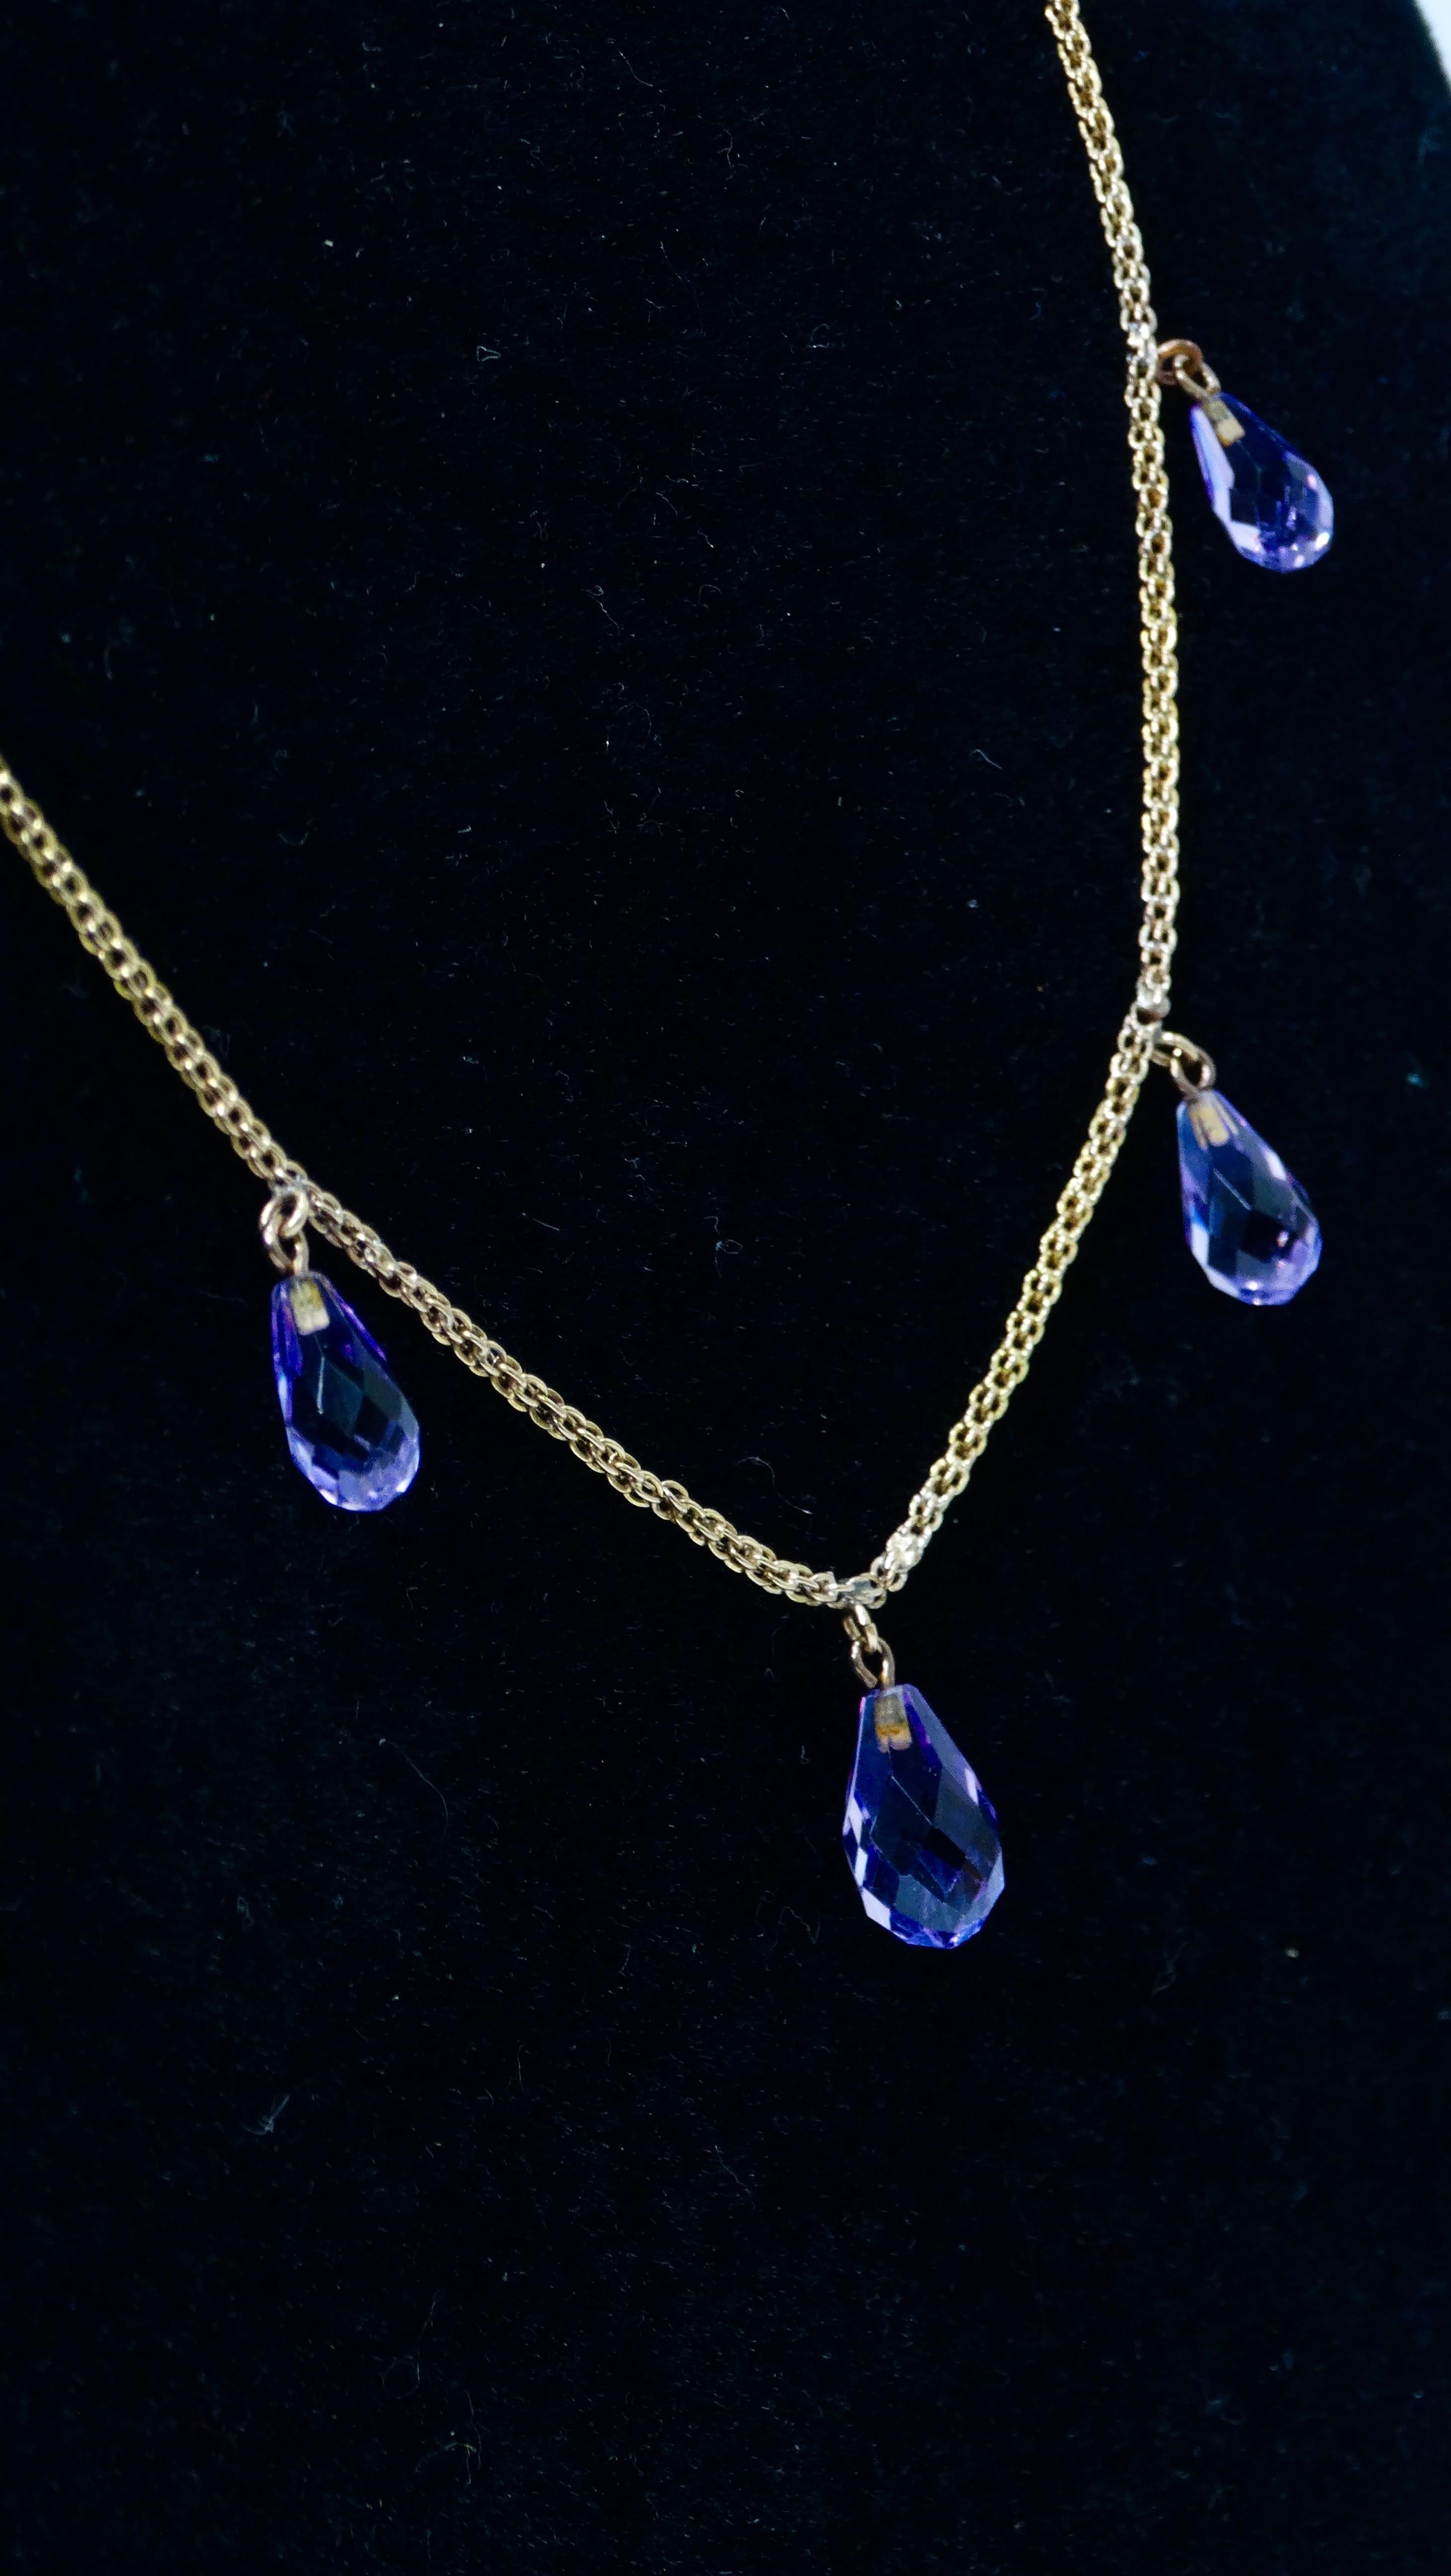 14k Gold and Amethyst Teardrop Necklace In Excellent Condition For Sale In Scottsdale, AZ